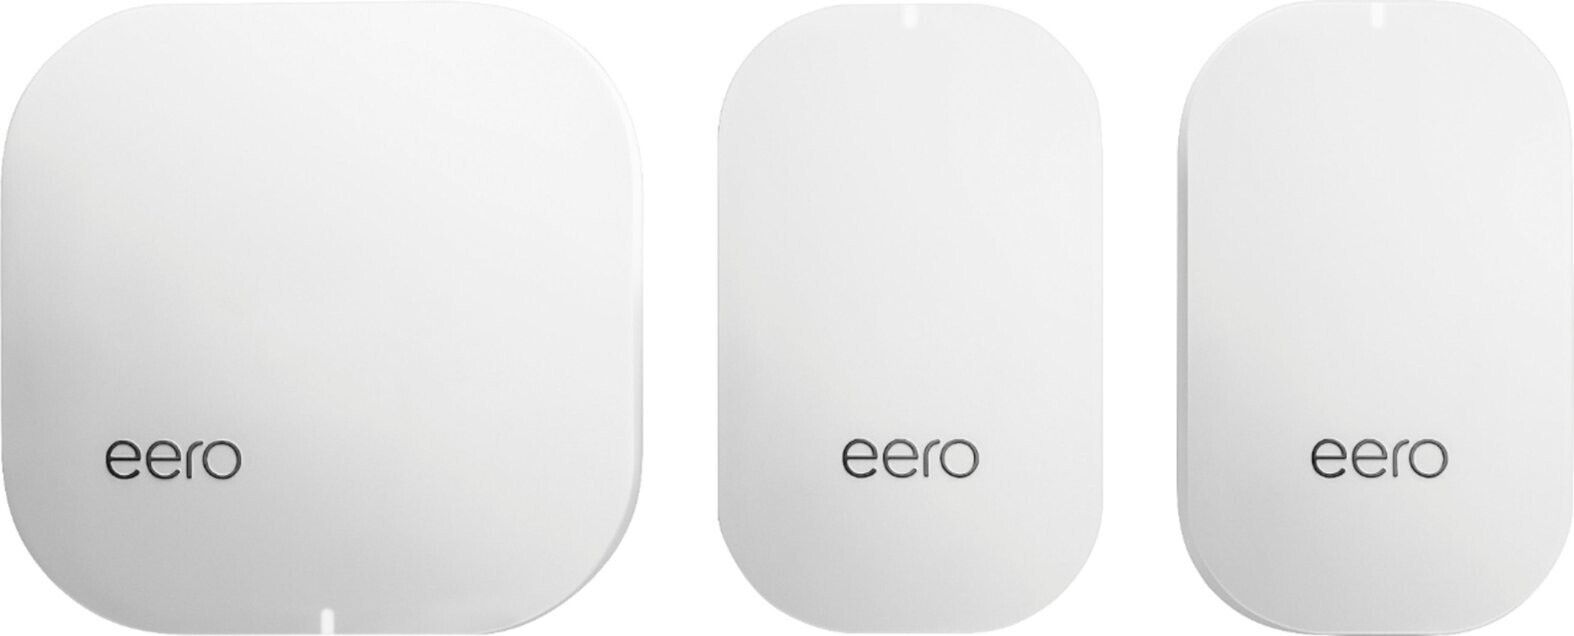 eero M010301 2nd Generation Home WiFi System with Two Beacons